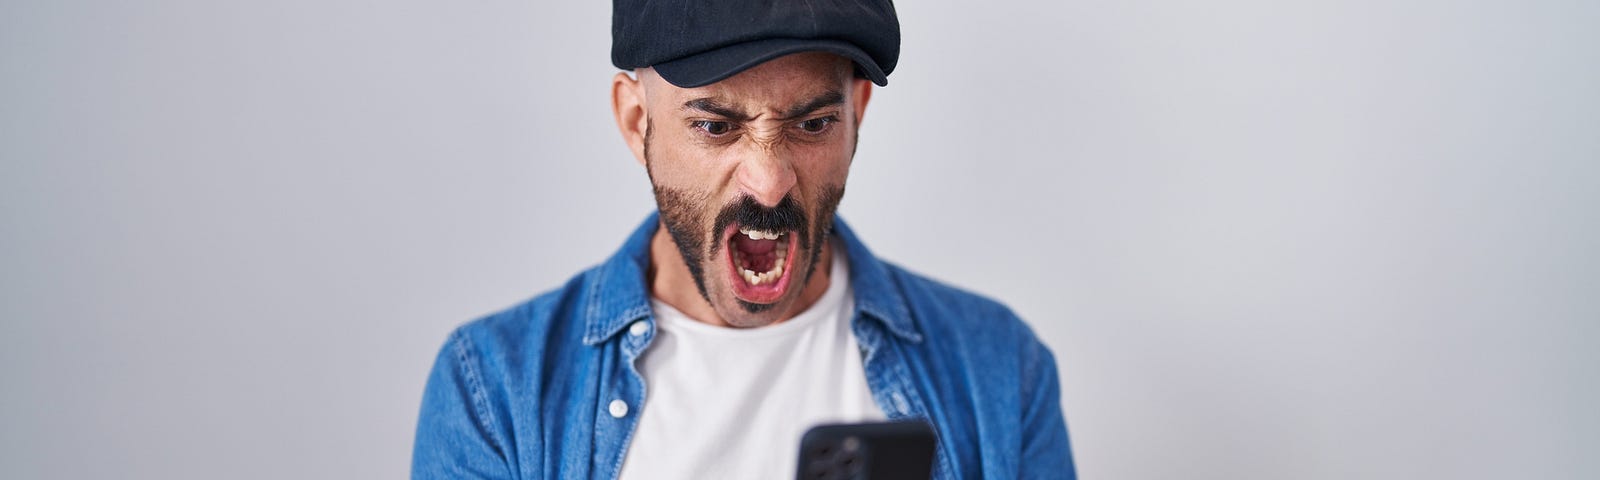 An angry man on his cell phone fexting